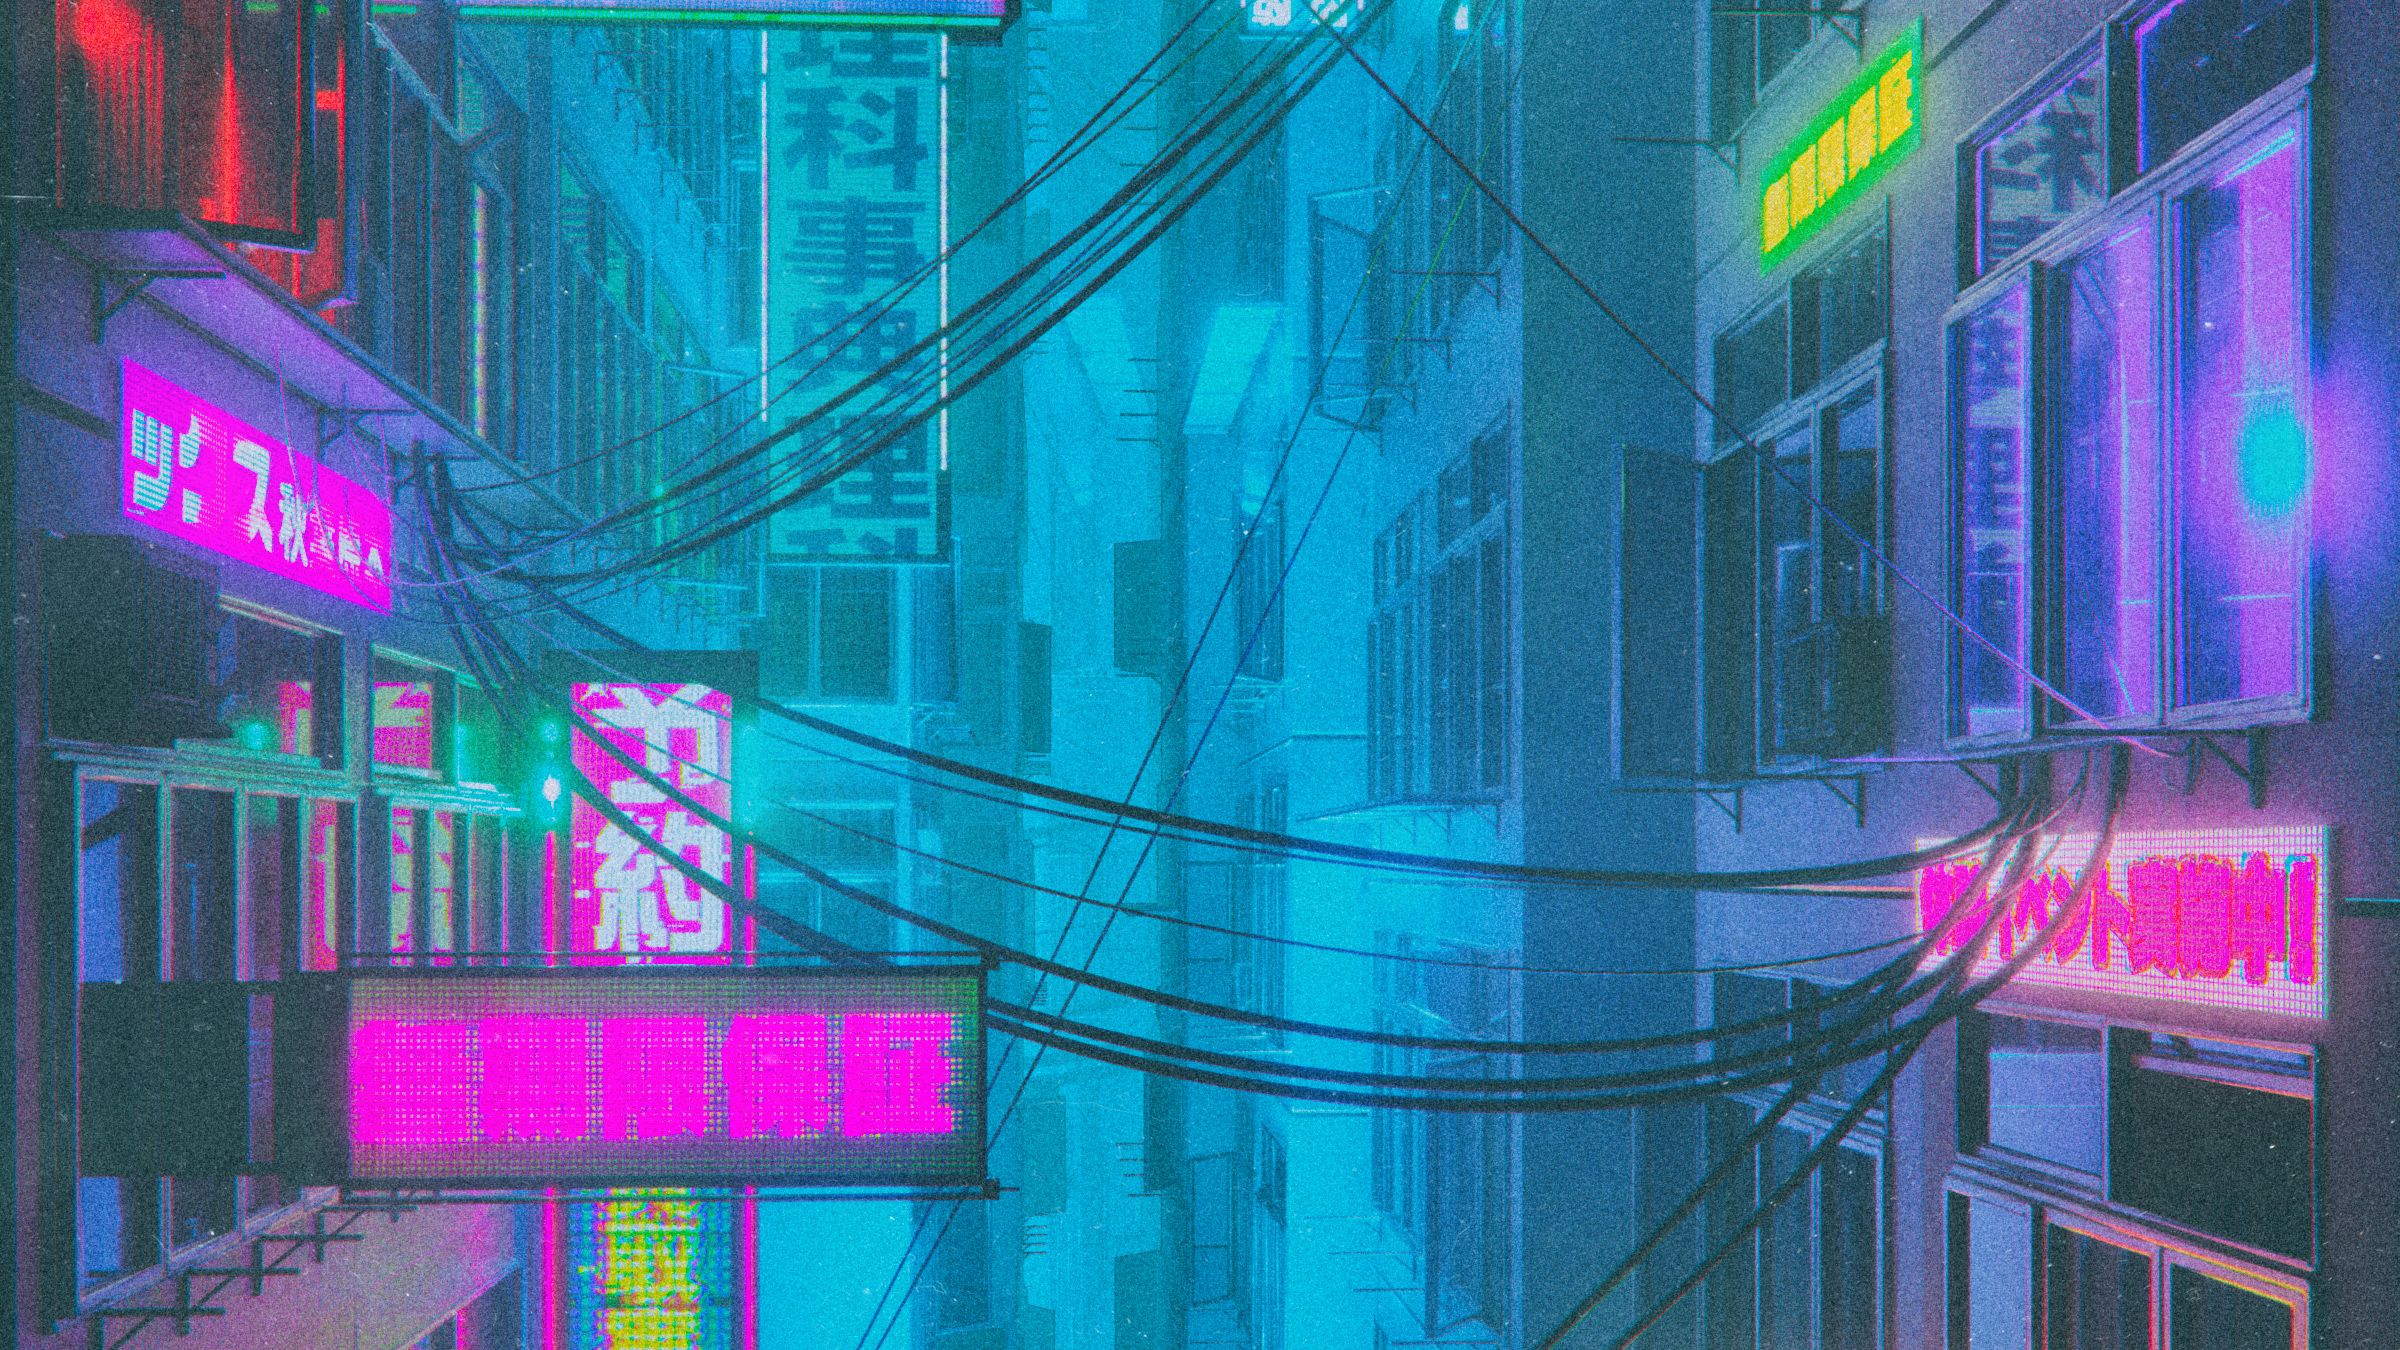 A cyberpunk city street at night with neon signs - 90s anime